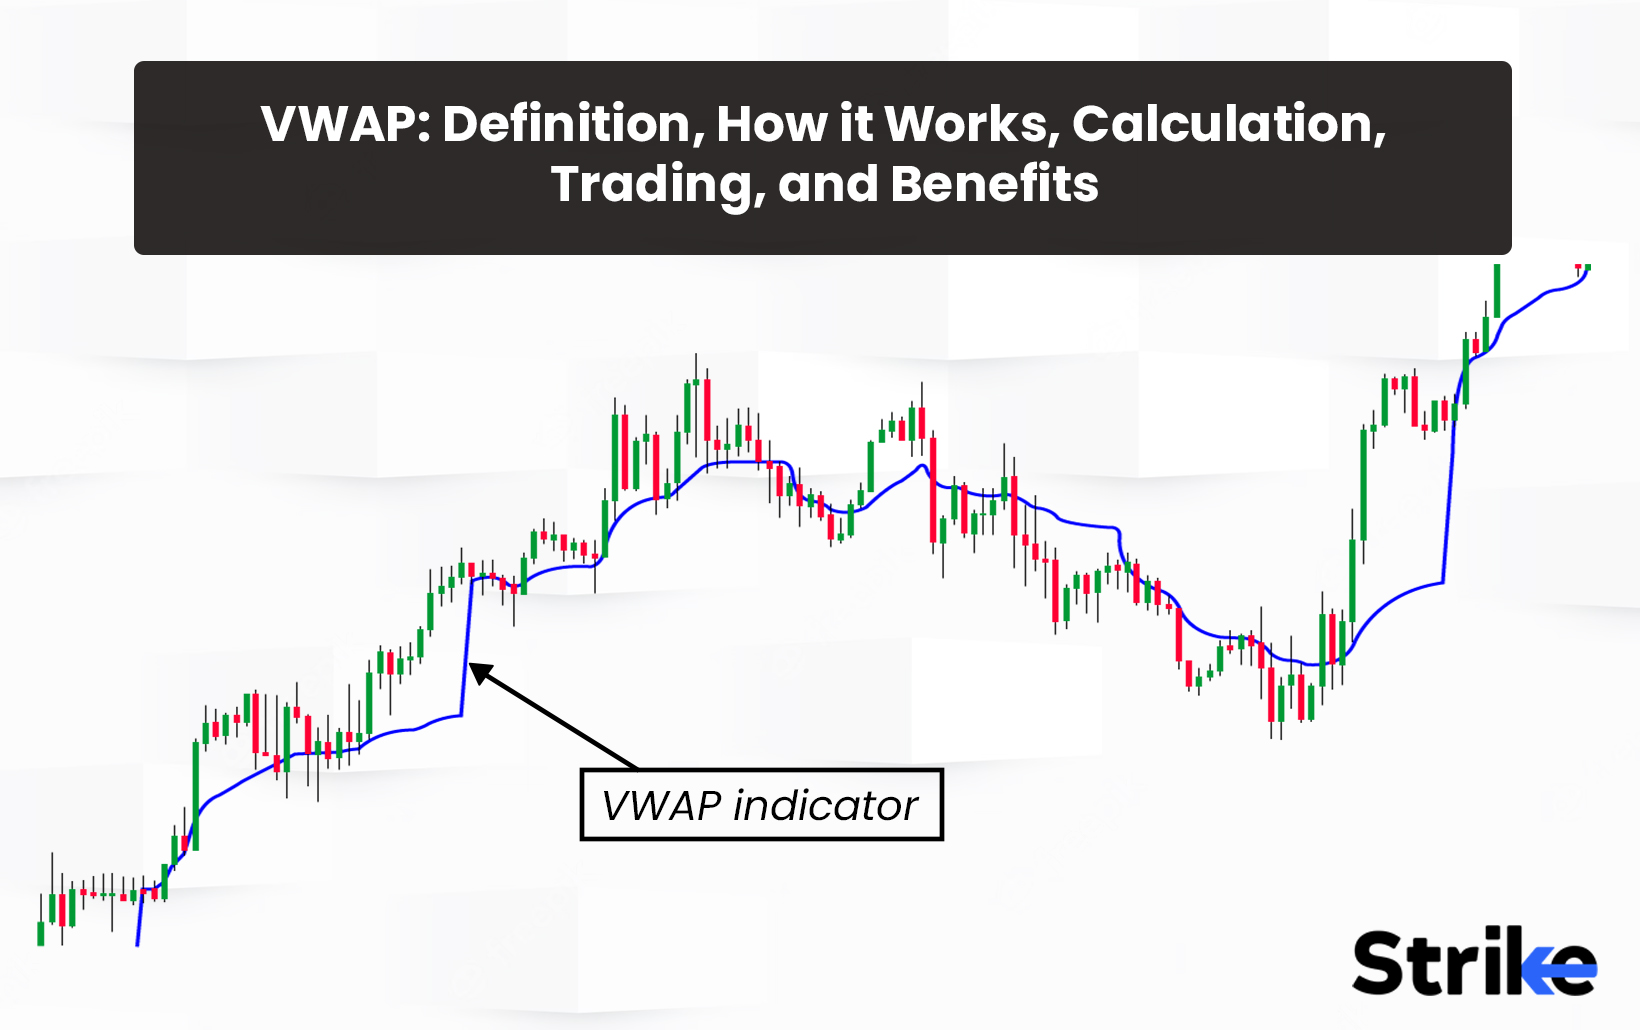 VWAP: Definition, How it Works, Calculation, Trading, and Benefits